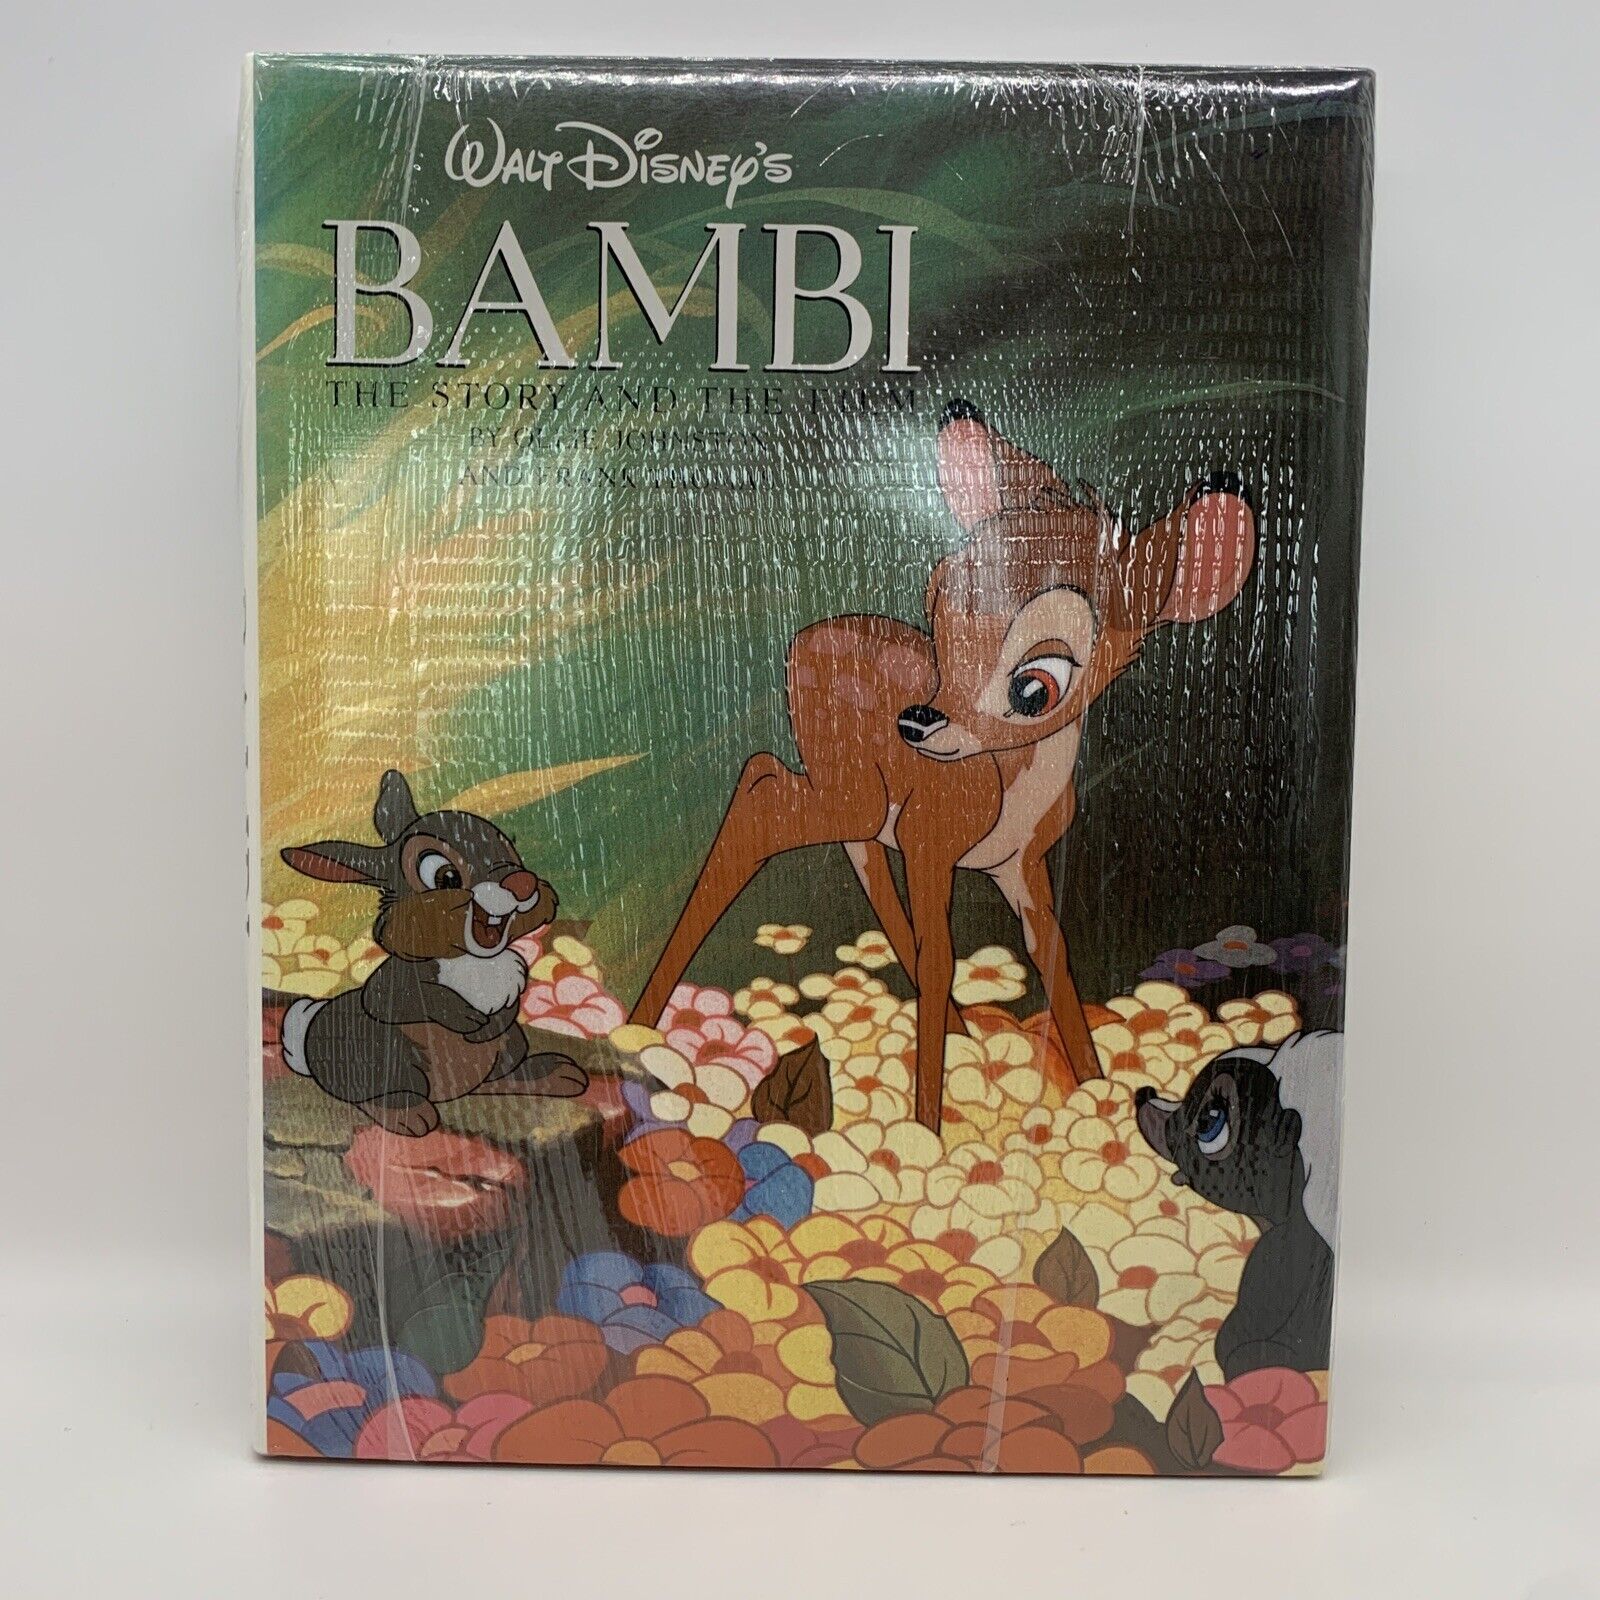 Walt Disney's Bambi The Story and The Film Book by Frank Thomas & Ollie Johnston